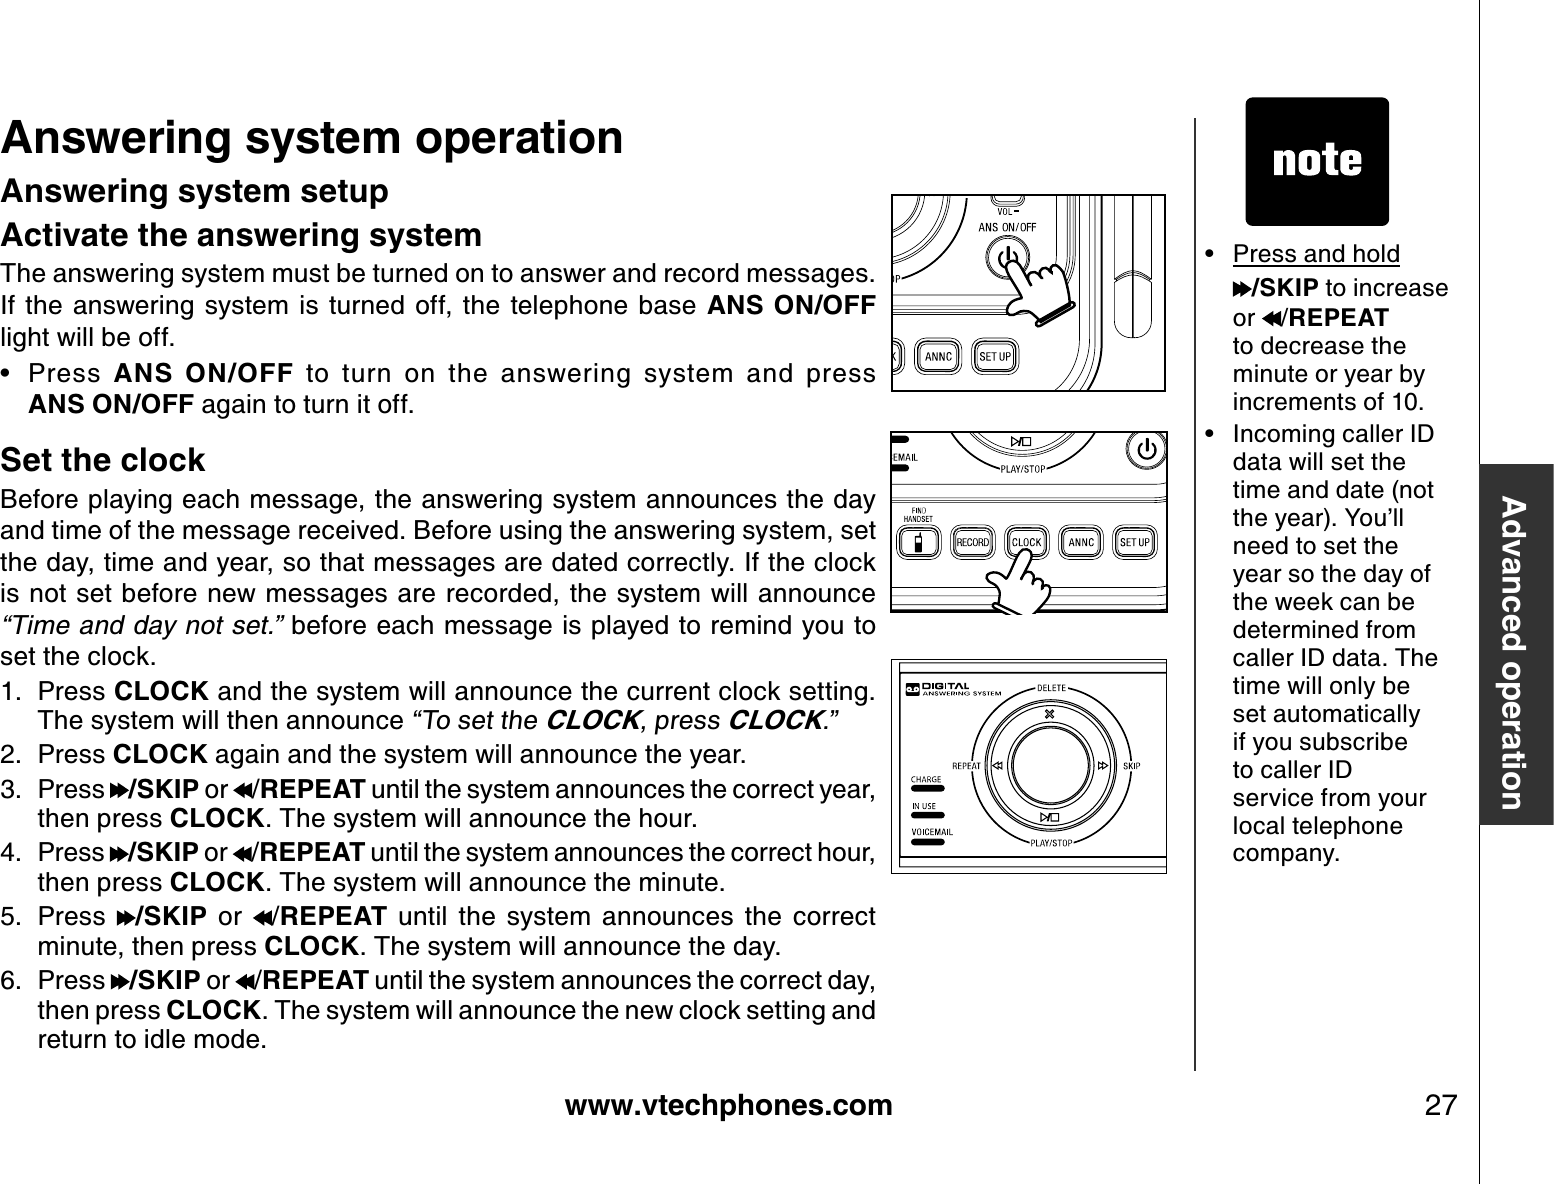 www.vtechphones.com 27Advanced operationAnswering system operationAnswering system setupActivate the answering systemThe answering system must be turned on to answer and record messages. If  the  answering  system  is turned  off, the  telephone  base  ANS  ON/OFFlight will be off.Press  ANS  ON/OFF  to  turn  on  the  answering  system  and  press                 ANS ON/OFF again to turn it off.Set the clockBefore playing each message, the answering system announces the day and time of the message received. Before using the answering system, set the day, time and year, so that messages are dated correctly. If the clock is not set before new messages are recorded, the system will announce “Time a n d da y n o t s et.” before each message is played to remind you to set the clock. Press CLOCK and the system will announce the current clock setting. The system will then announce “To set the CLOCK, press CLOCK.”Press CLOCK again and the system will announce the year.Press  /SKIP or  /REPEAT until the system announces the correct year, then press CLOCK. The system will announce the hour.Press  /SKIP or  /REPEAT until the system announces the correct hour, then press CLOCK. The system will announce the minute.Press  /SKIP  or  /REPEAT  until  the  system  announces  the  correct minute, then press CLOCK. The system will announce the day.Press  /SKIP or  /REPEAT until the system announces the correct day, then press CLOCK. The system will announce the new clock setting and return to idle mode.•1.2.3.4.5.6.• Press and hold/SKIP to increase or  /REPEAT to decrease the minute or year by increments of 10. • Incoming caller ID data will set the time and date (not the year). You’ll need to set the year so the day of the week can be determined from caller ID data. The time will only be set automatically if you subscribe to caller ID service from your local telephone company.